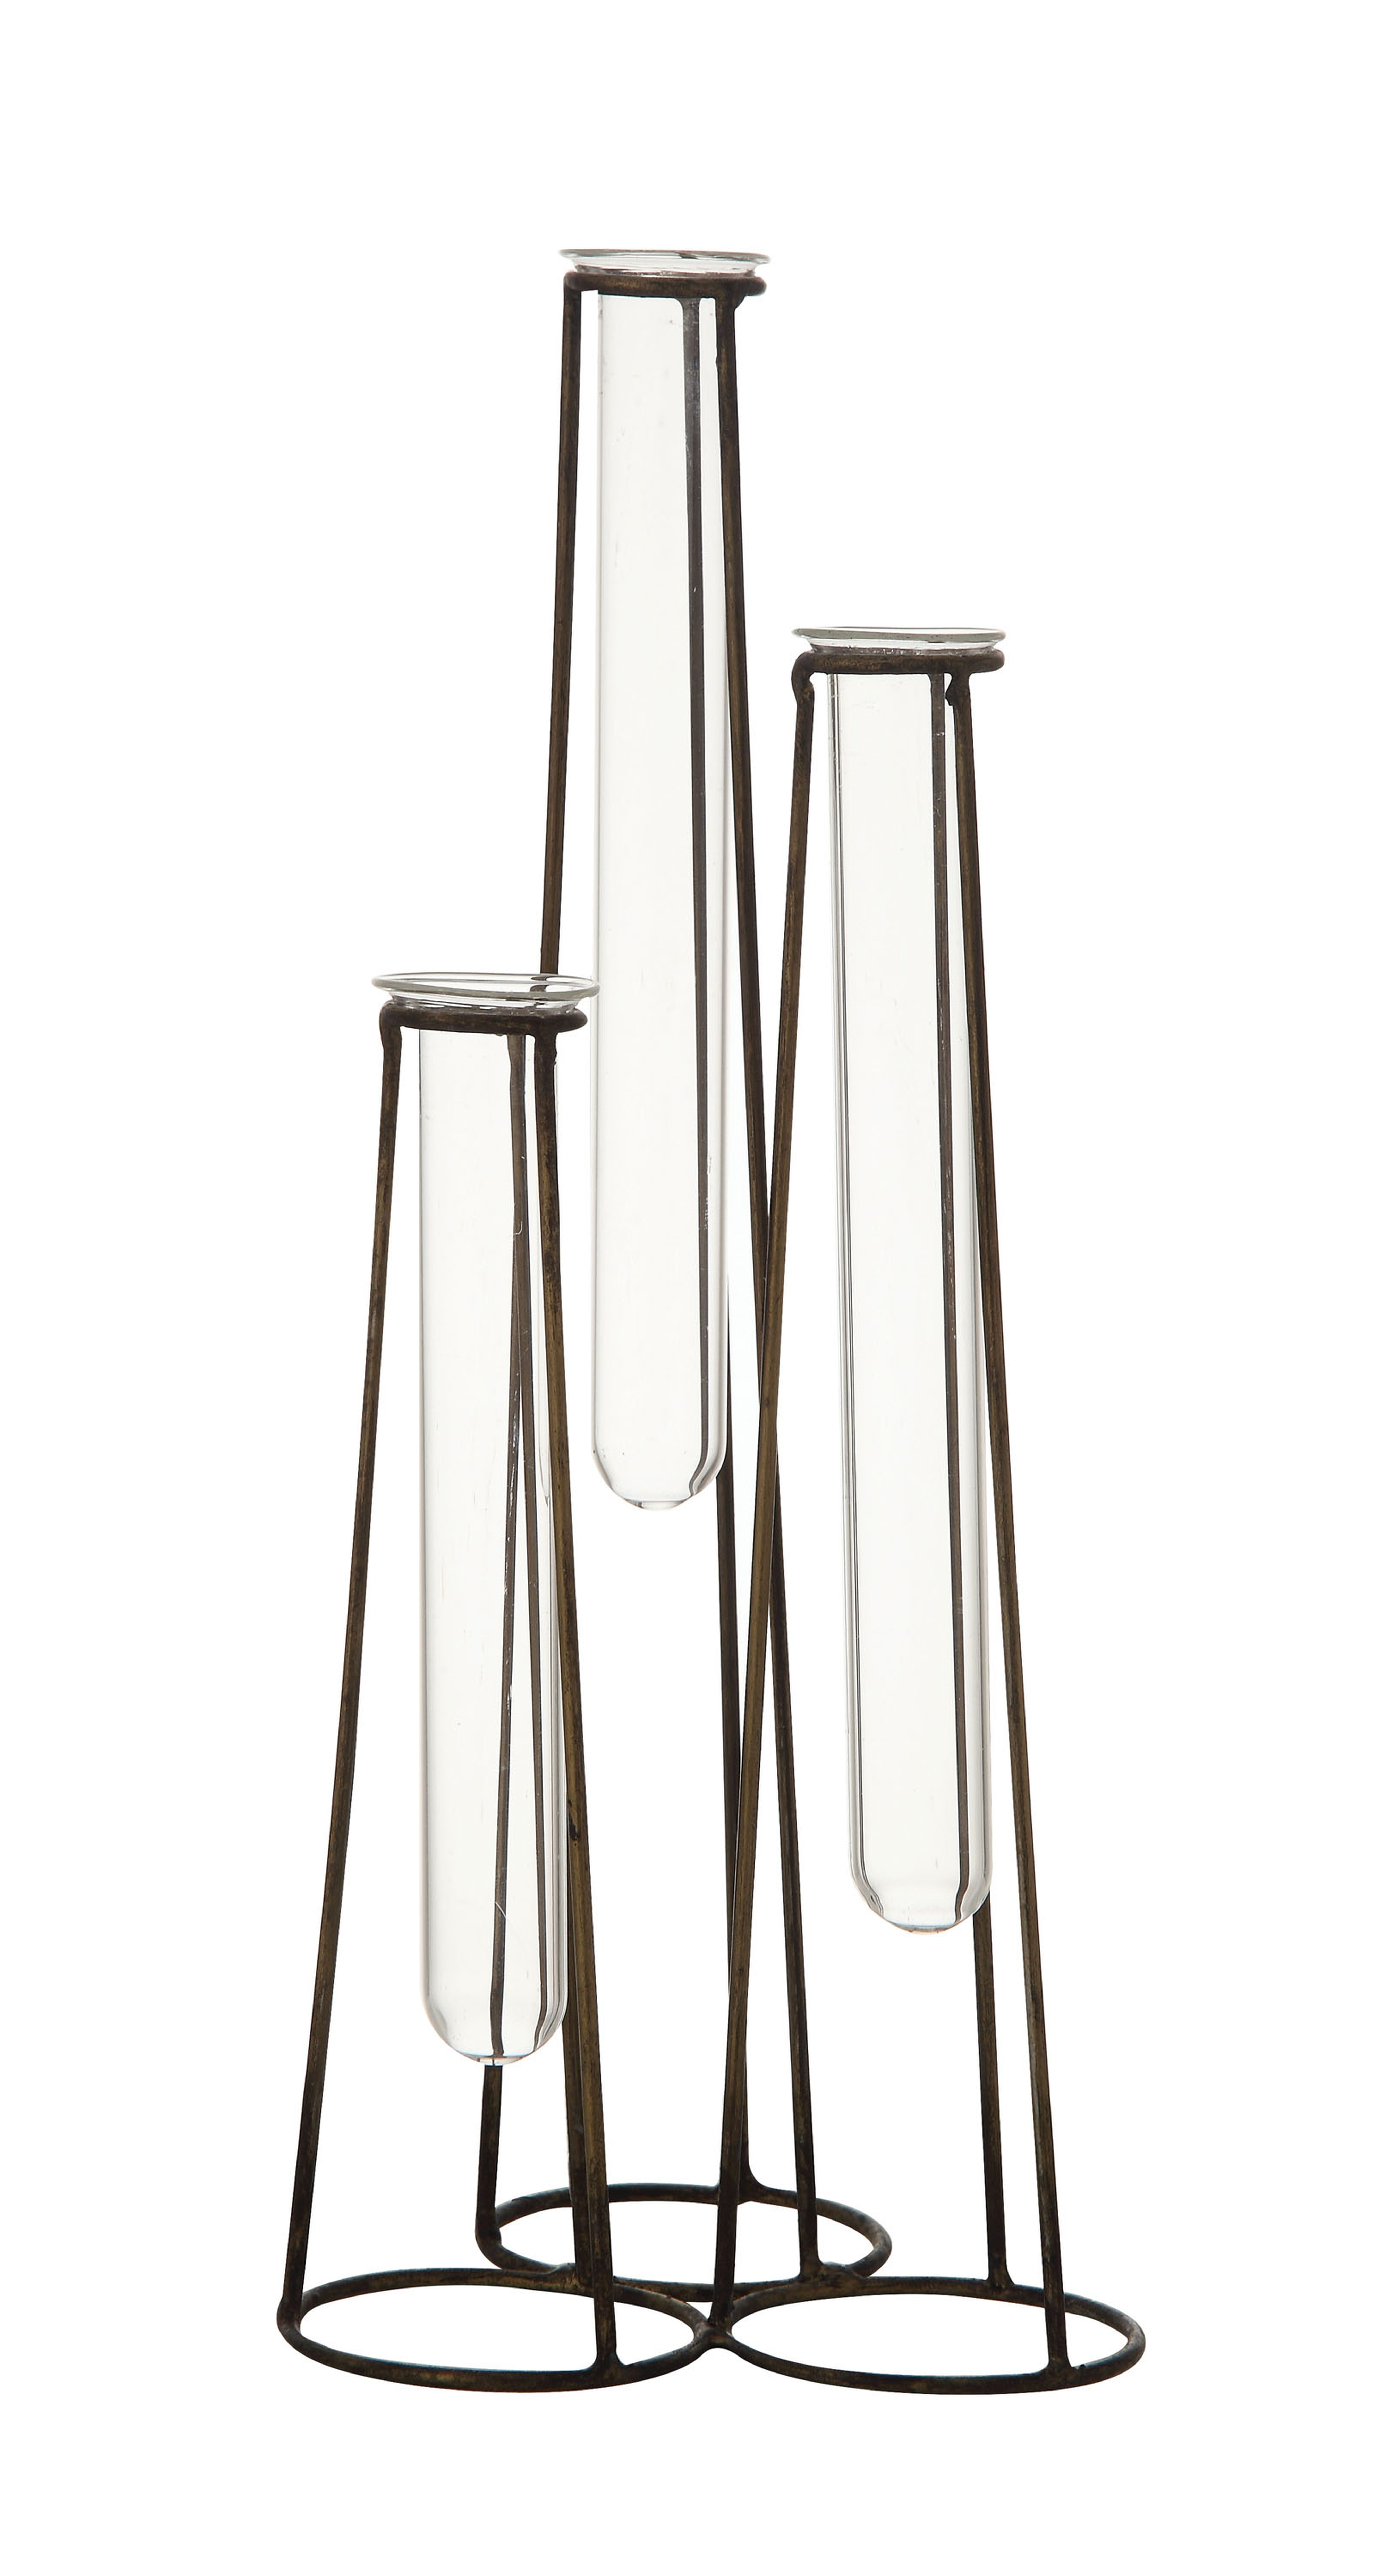 Three Test Tube Bud Vases in Metal Stand - Moss & Wilder